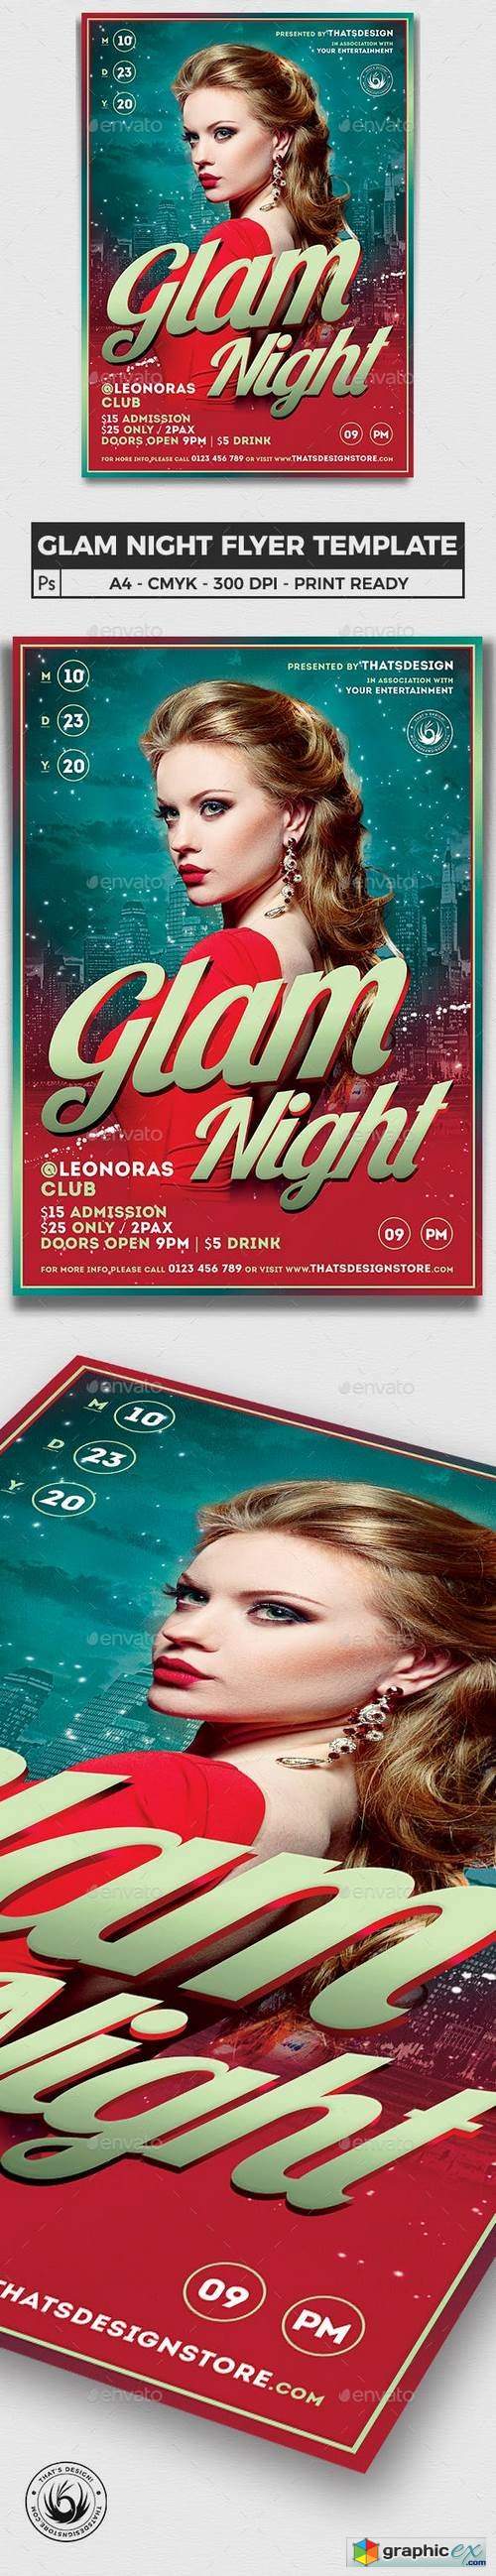 Glam Night Flyer Template 15696722